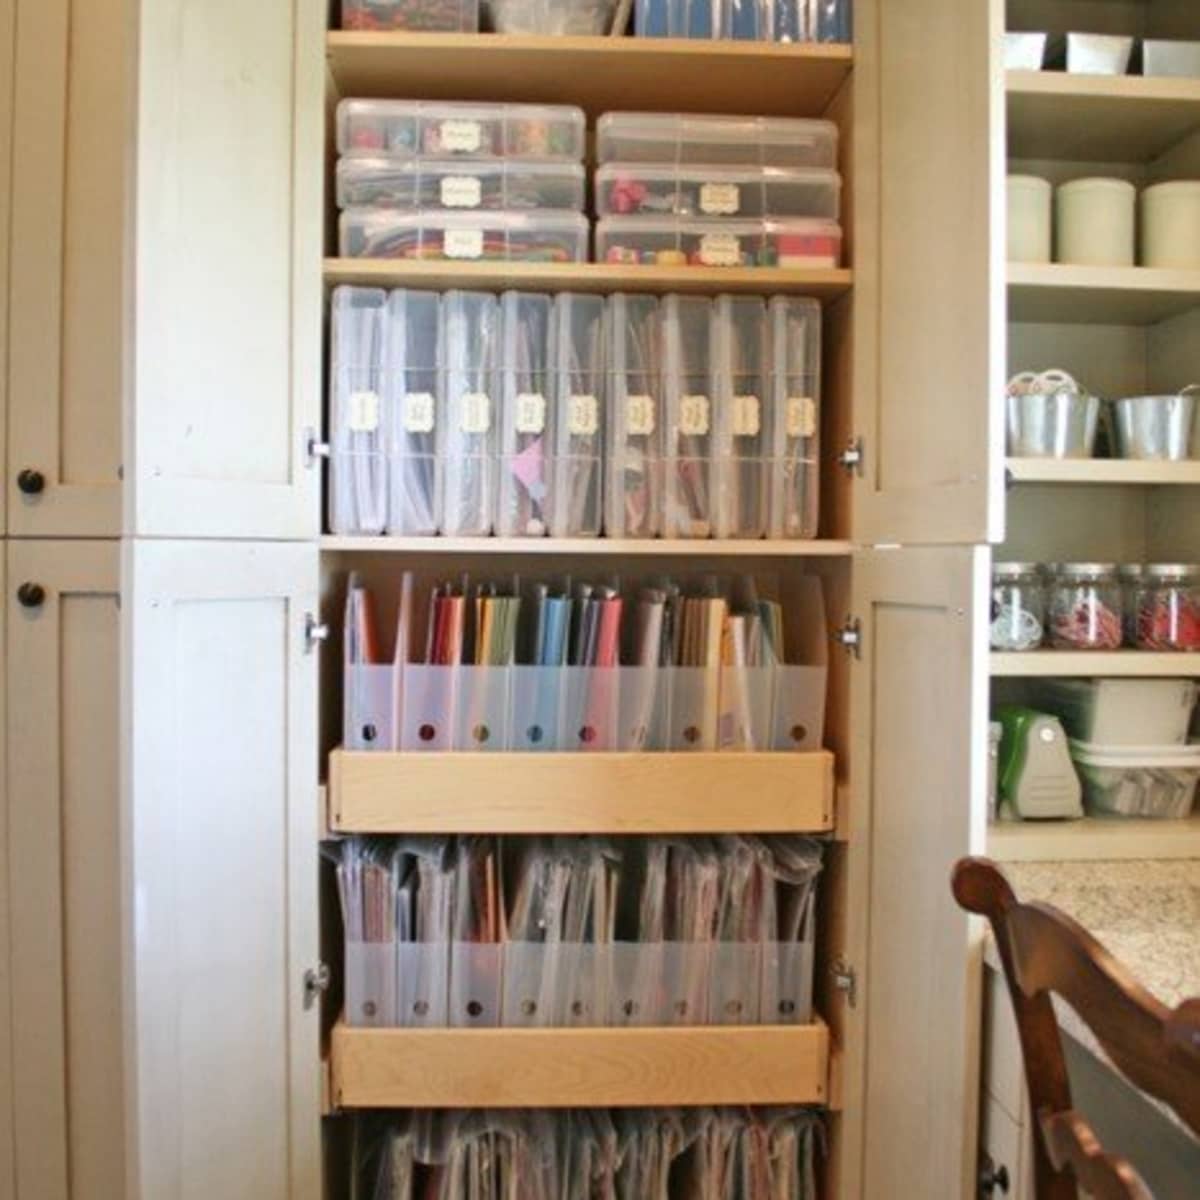 Frugal And Creative Storage Ideas For, Inexpensive Shelving Solutions